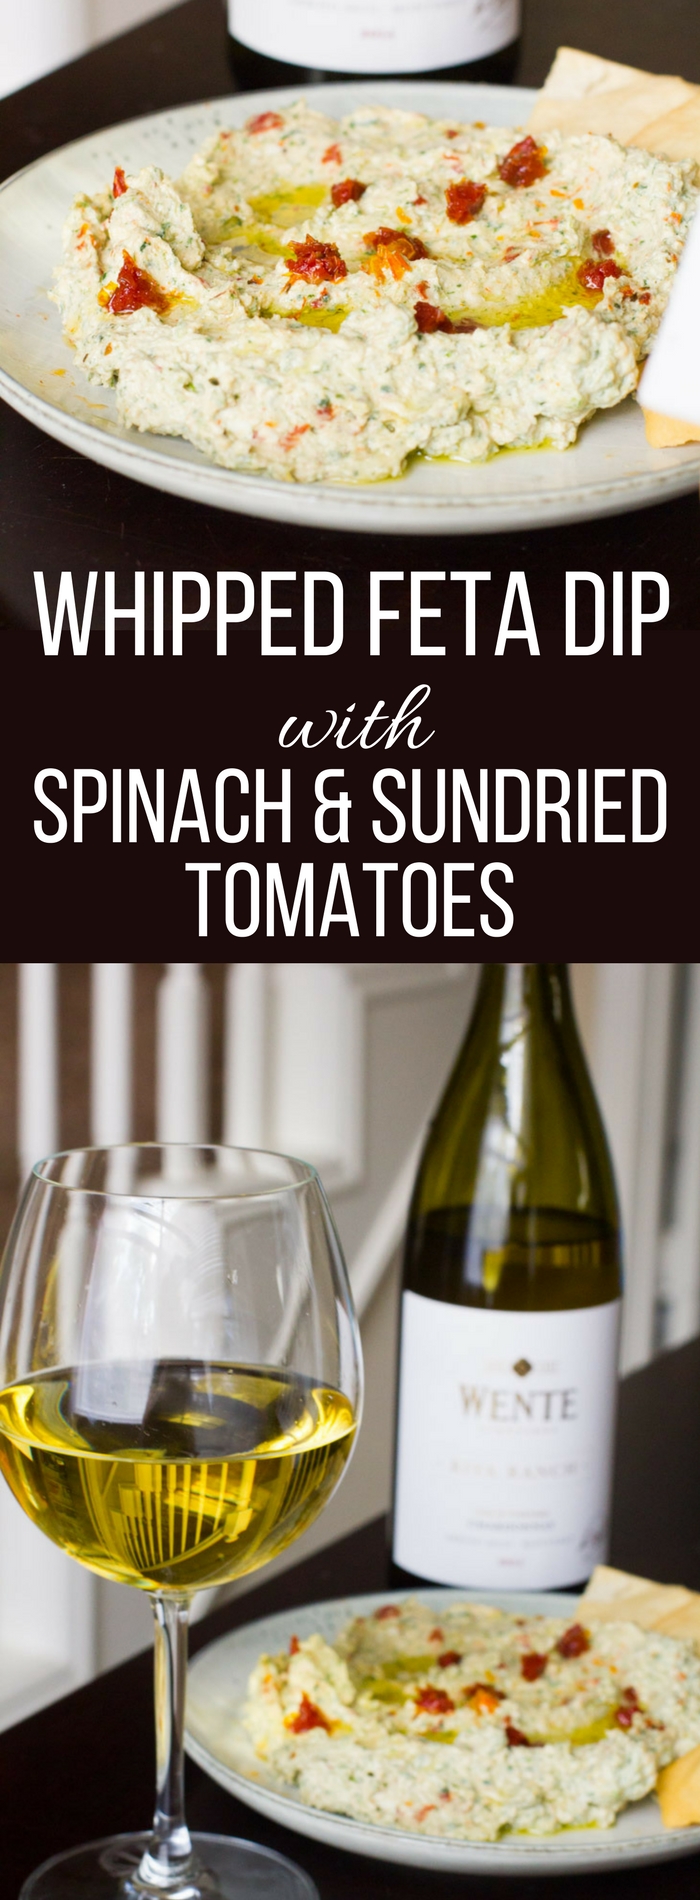 MSG 4 21+ This whipped feta dip with spinach and sundried tomatoes is the perfect party dip for a small or large gathering and pairs wonderfully with a glass of white wine. #ad